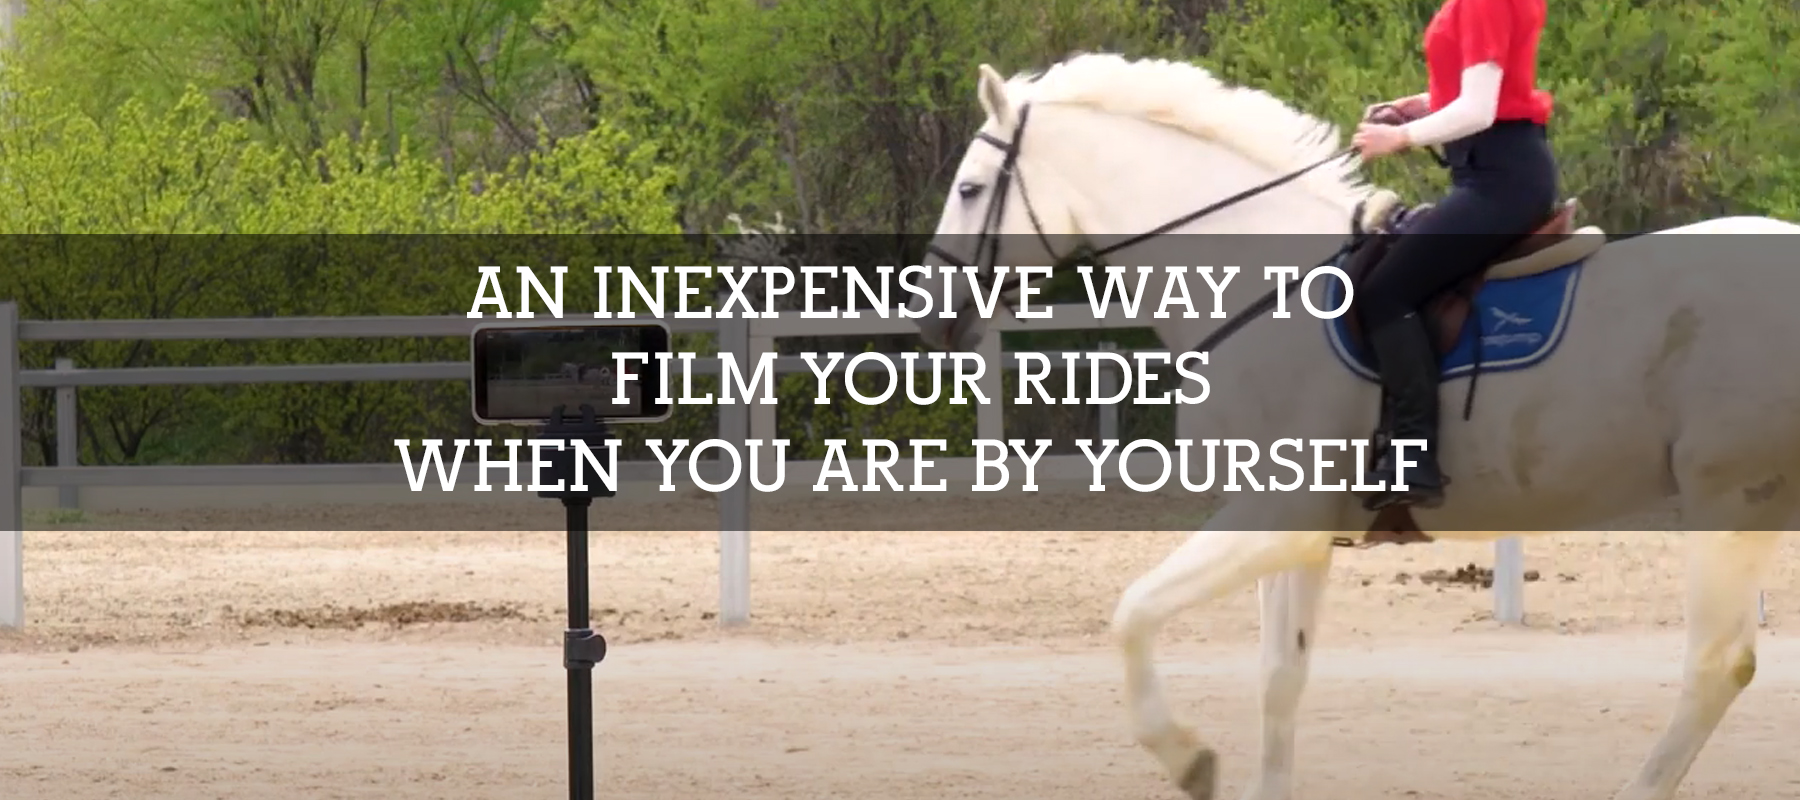 An Inexpensive Way to Film Your Rides when you are by yourself